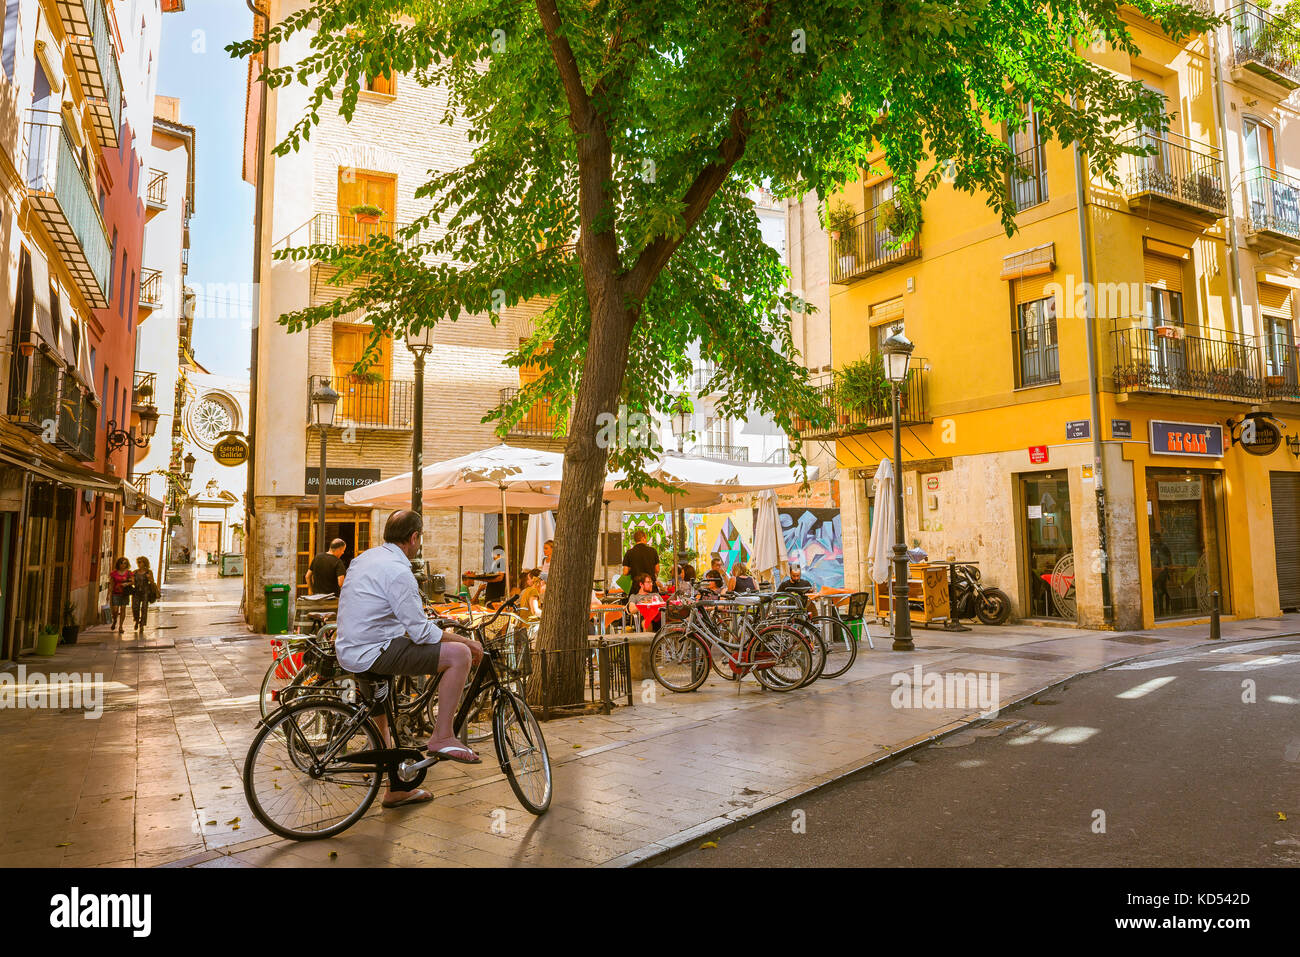 Valencia Spain old town, view of people sitting outside a bar in a small square in the historic old town quarter of Valencia, Spain. Stock Photo